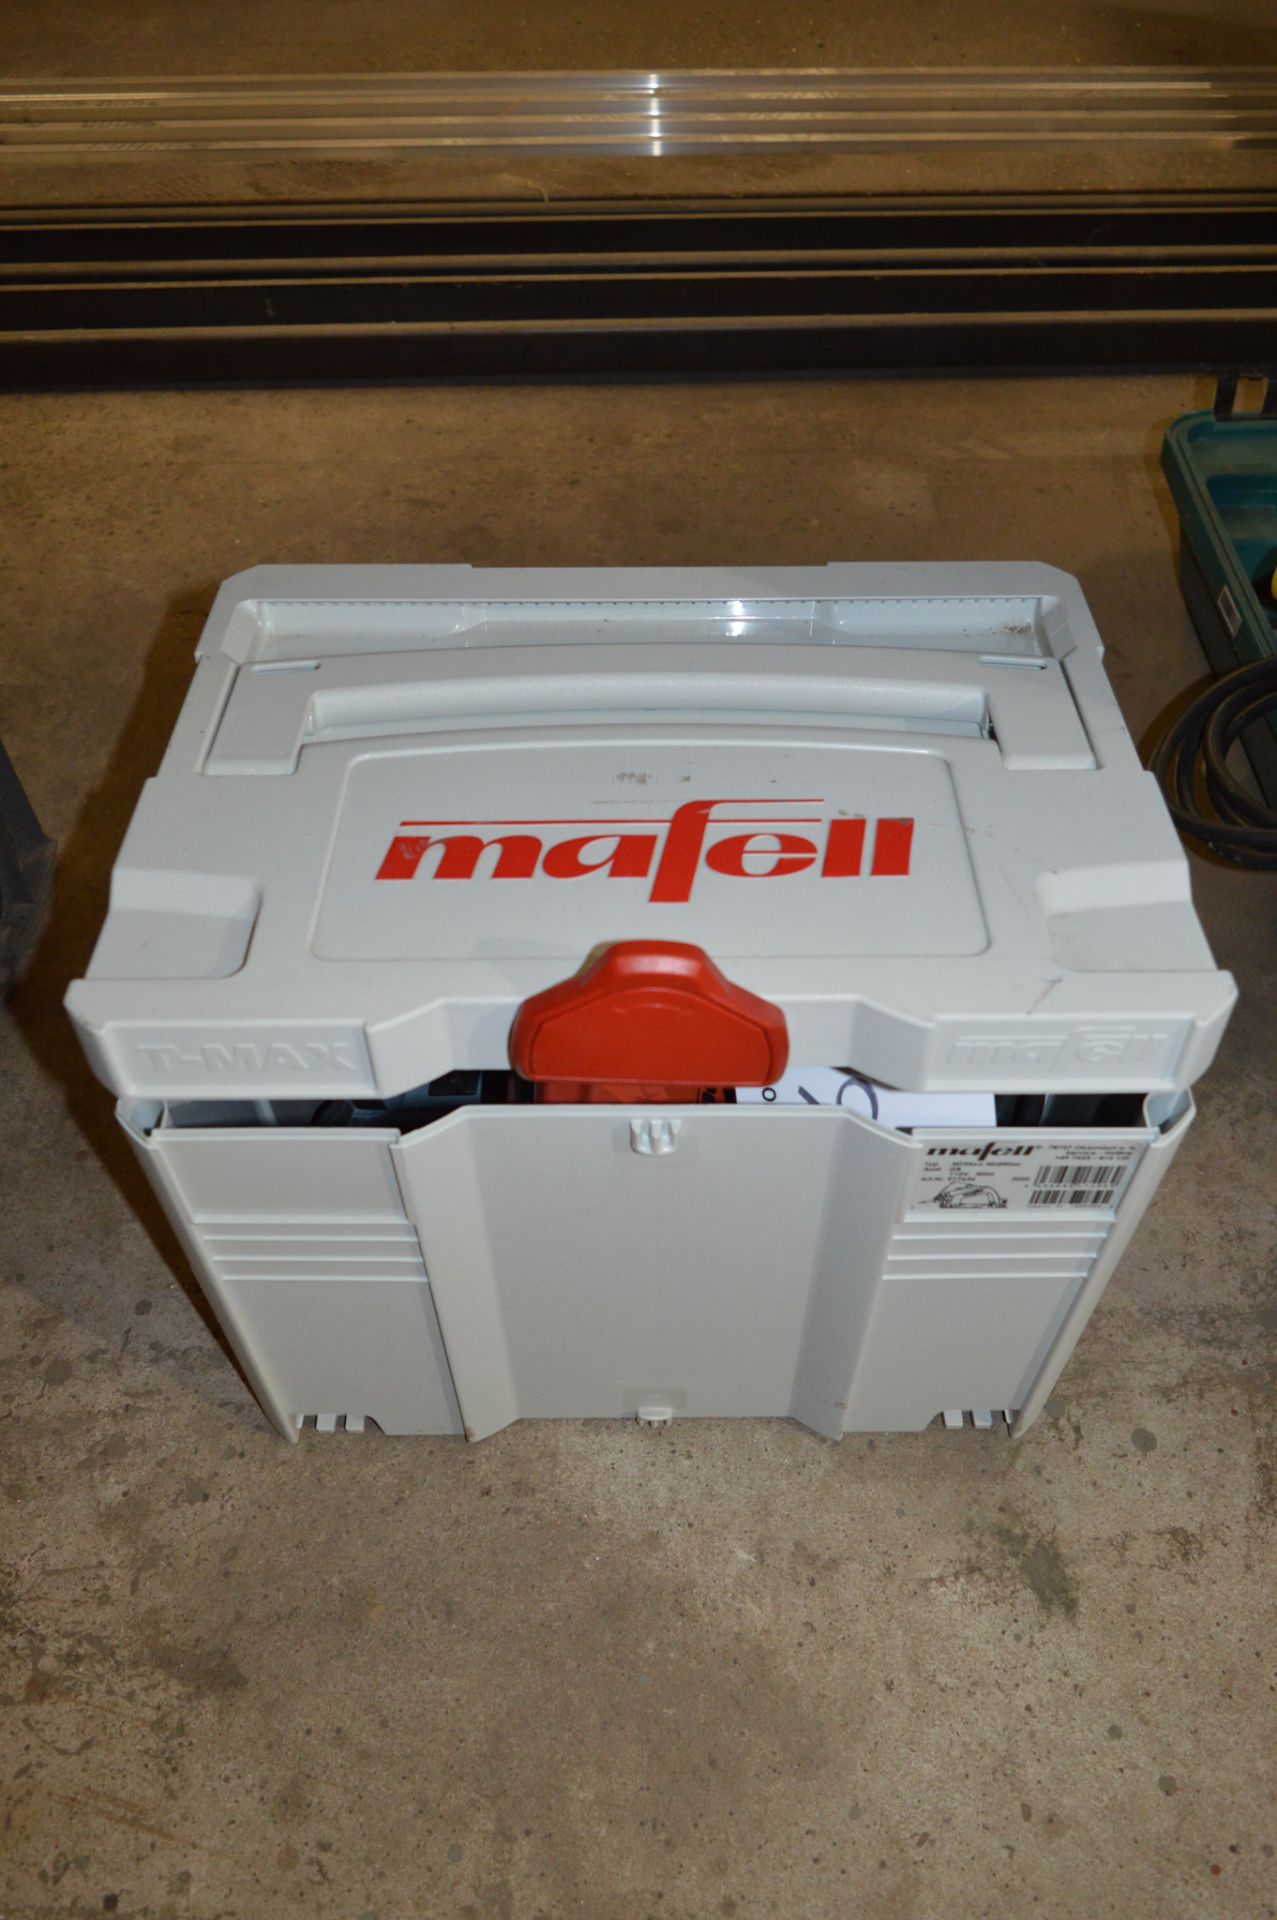 Mafell 110v plunge-cut saw Model: MT 55 CC c/w carry case and 2 F160 guide rails ** No VAT on hammer - Image 4 of 4